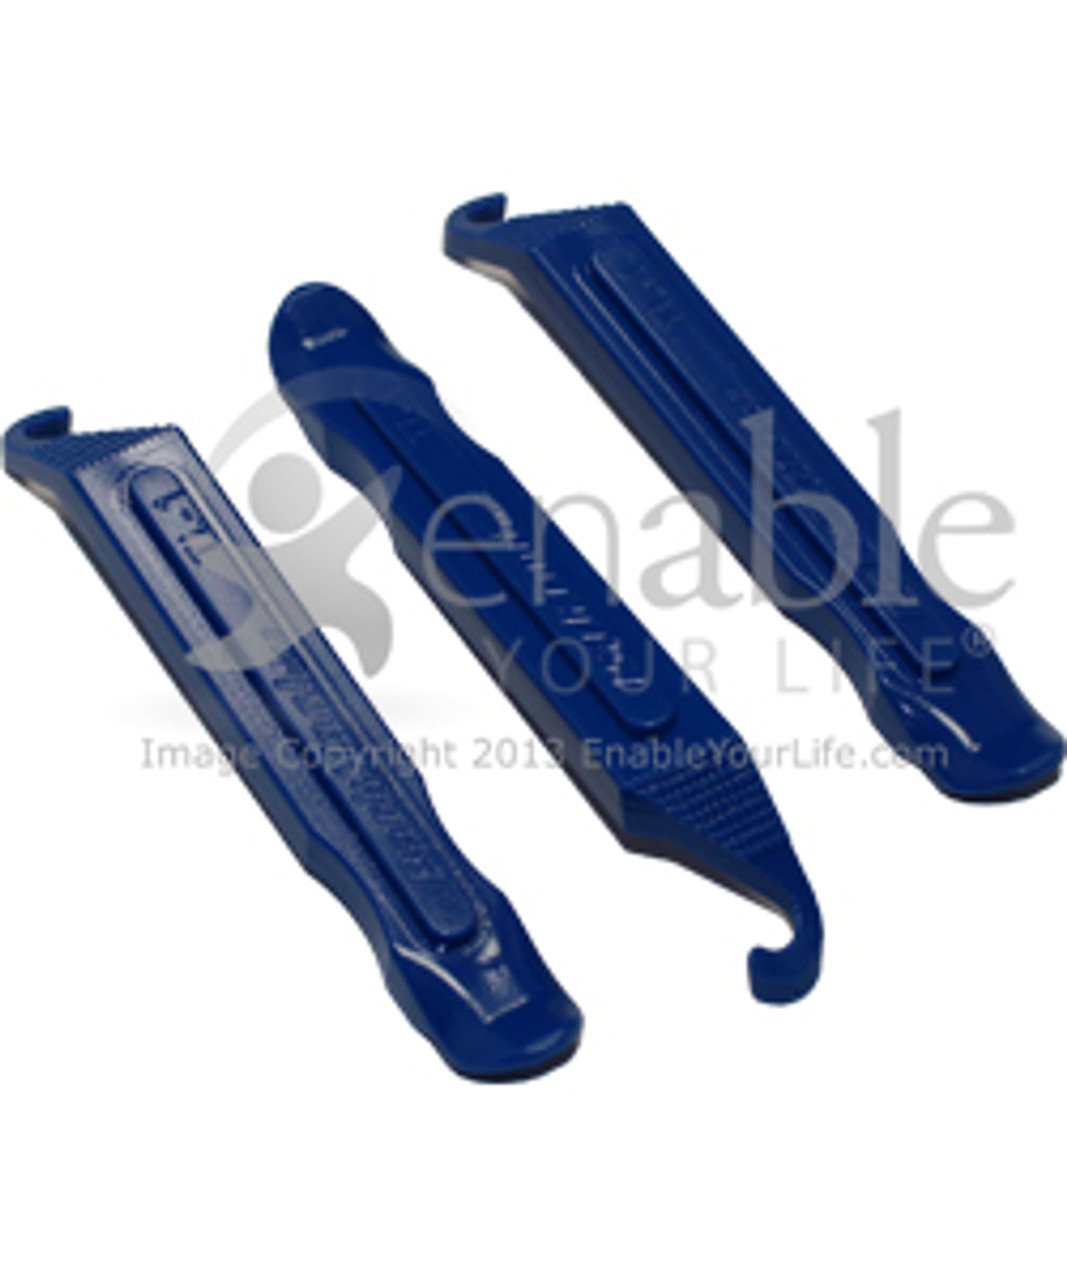 Plastic Levers Tire Installation Tool 3-Pack